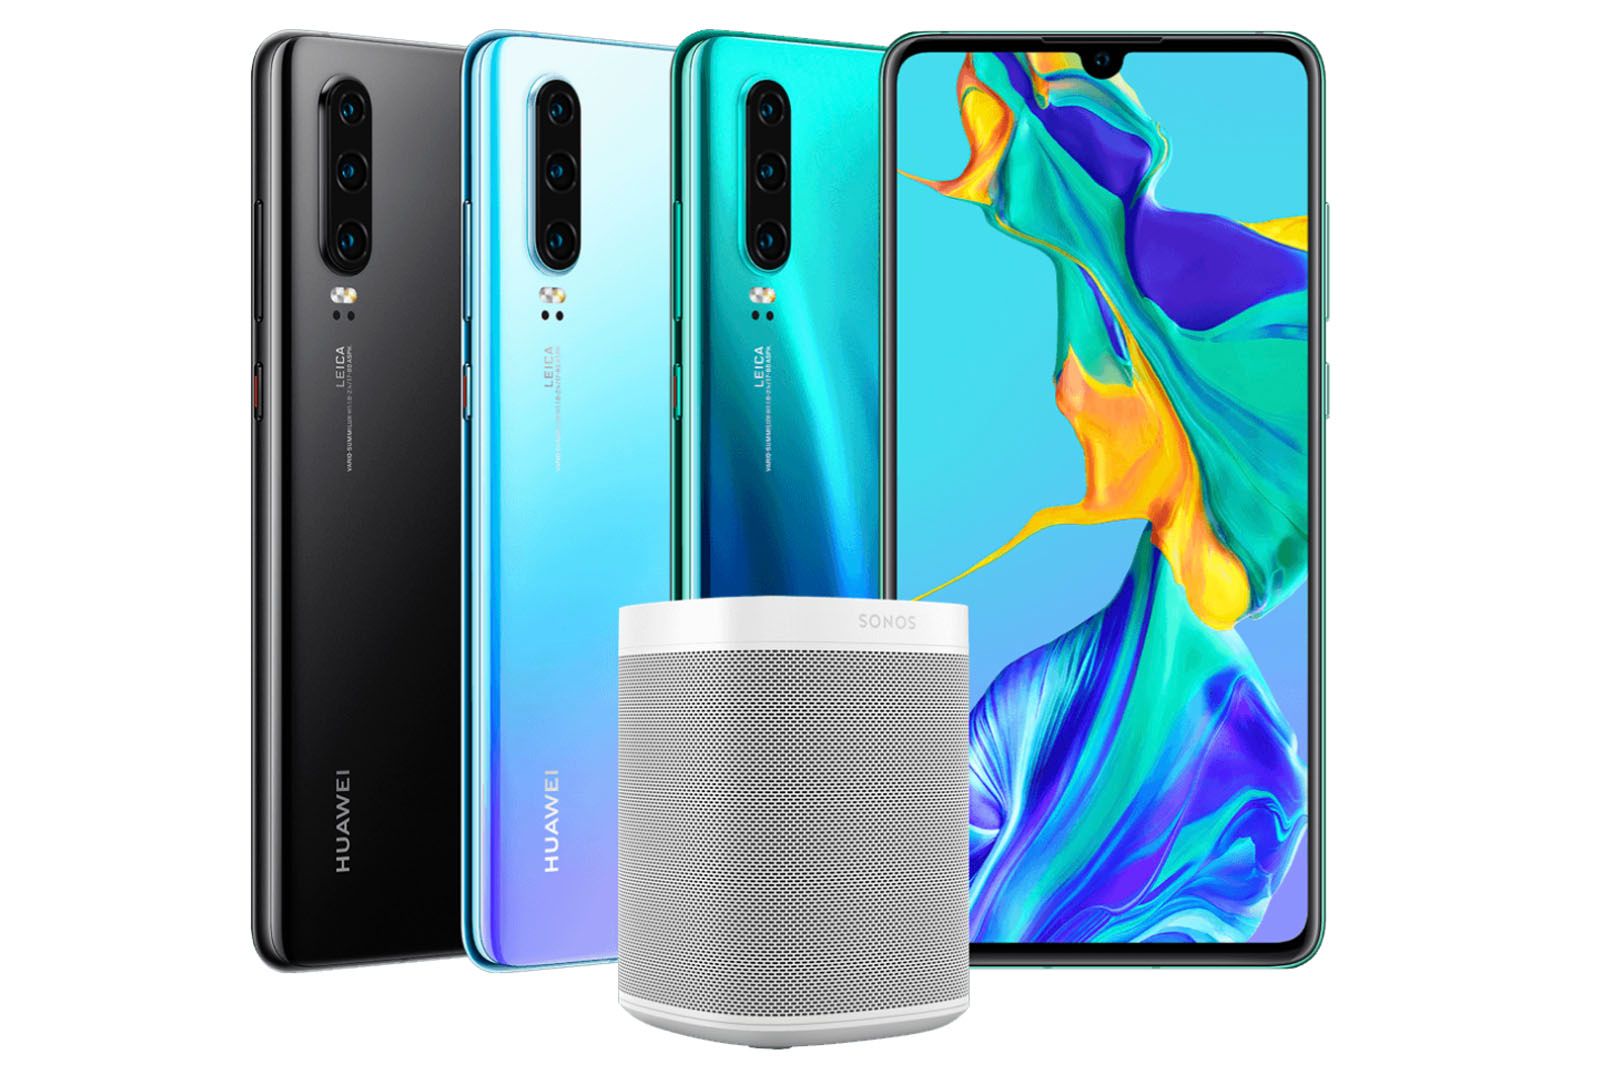 Huawei P30 Pro pre-order deals include a free Sonos